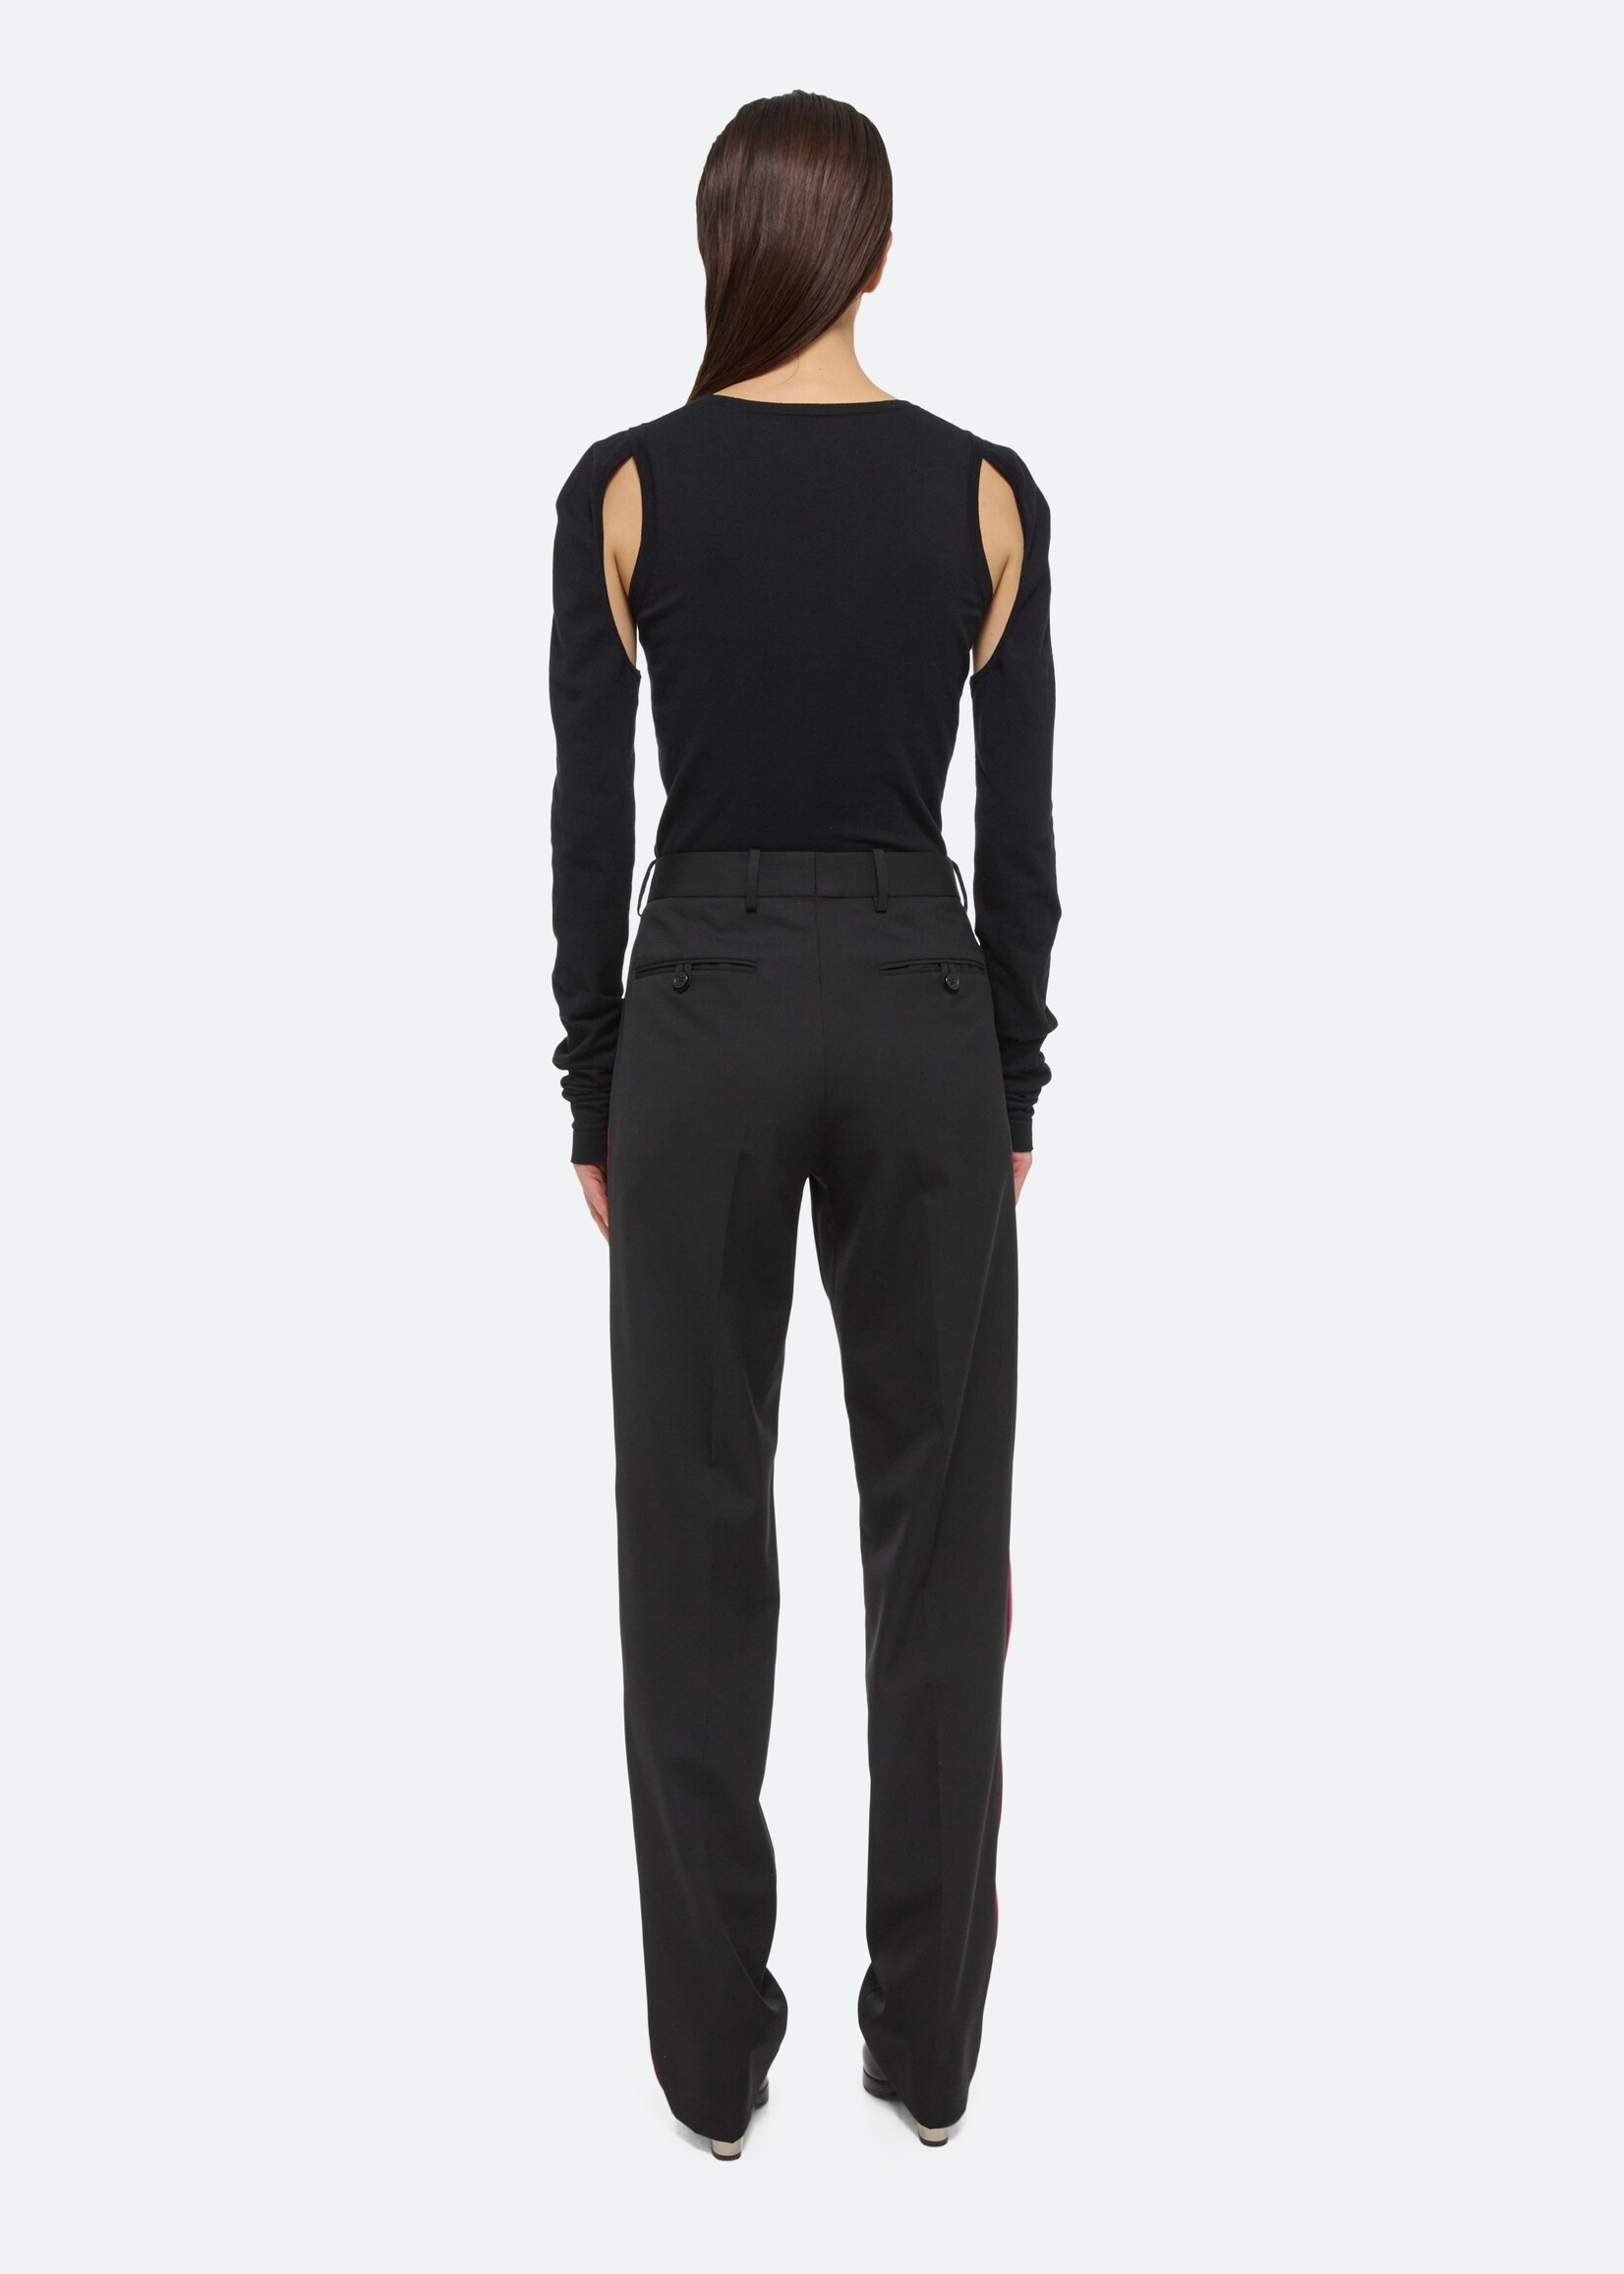 HELMUT LANG BY PETER DO Women's Cut Out Lightweight Sweater in Black